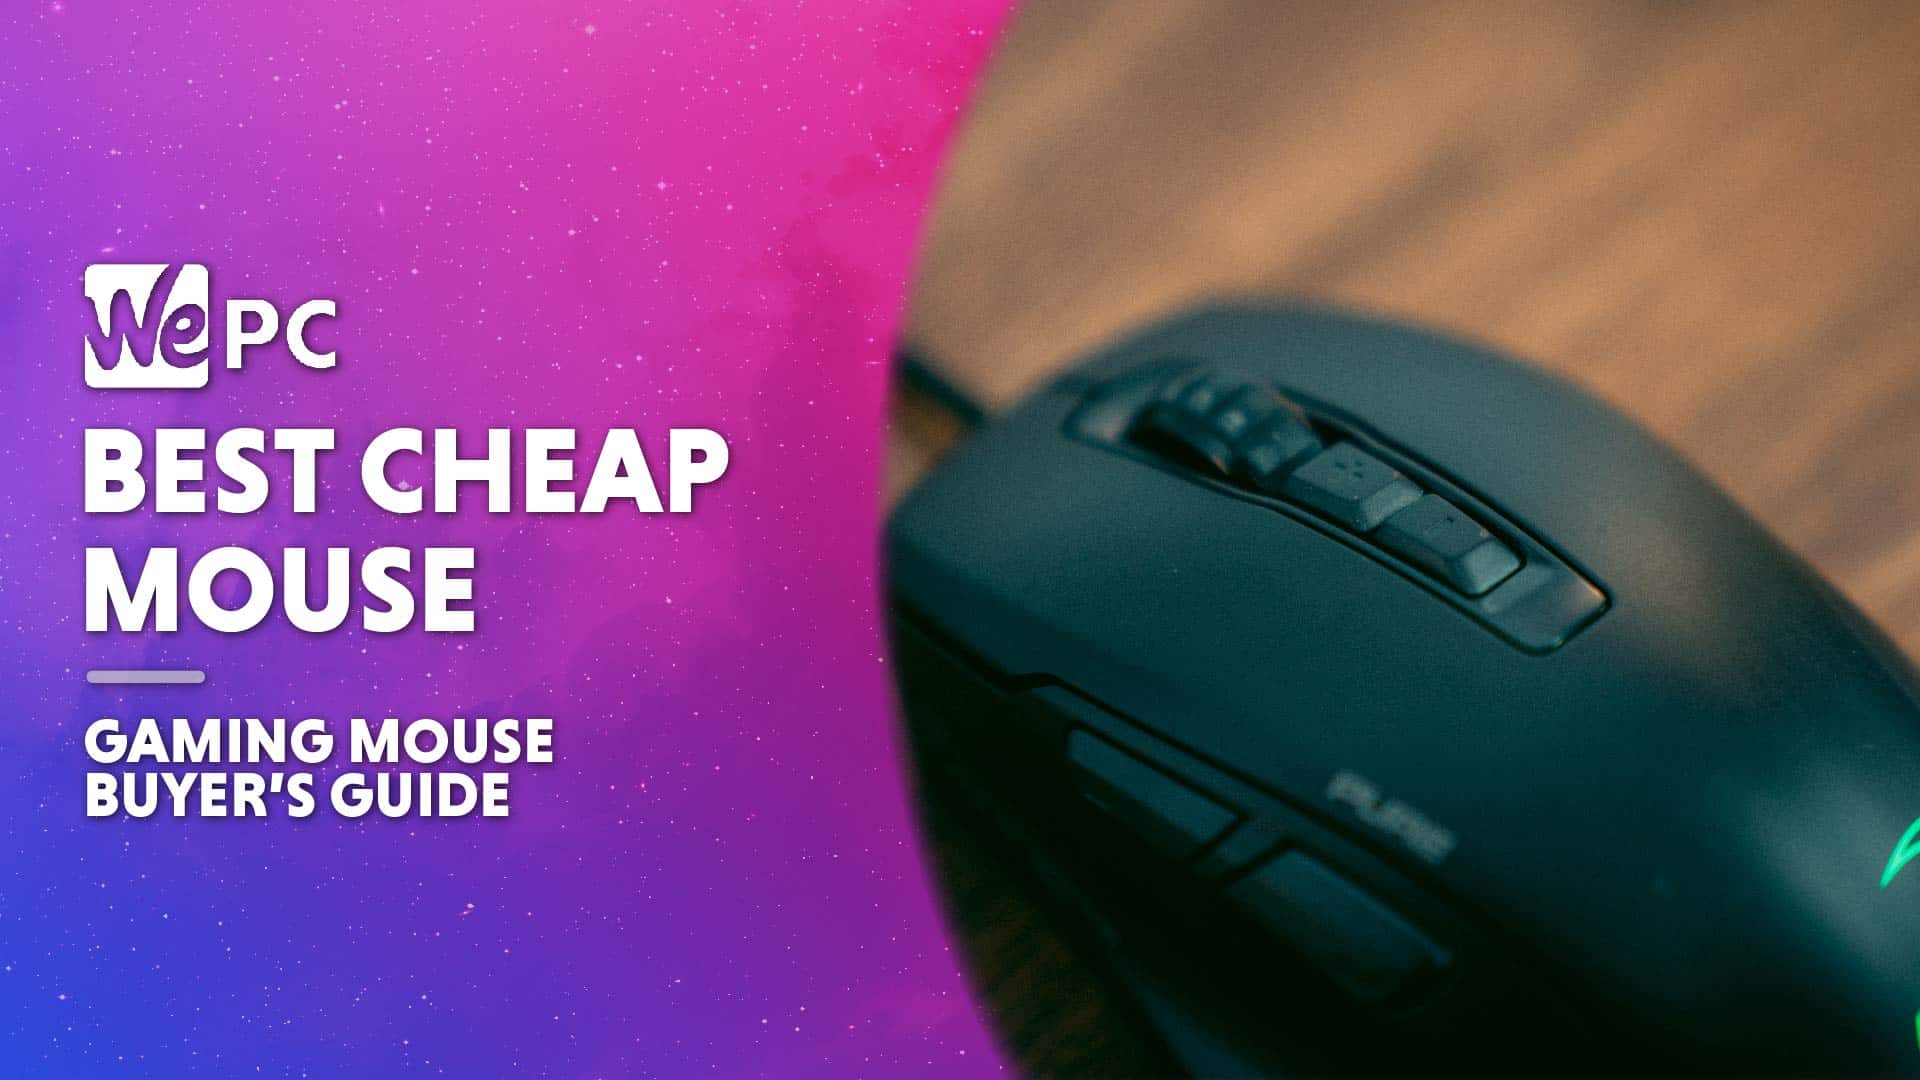 WEPC Best cheap gaming mouse Featured image 01